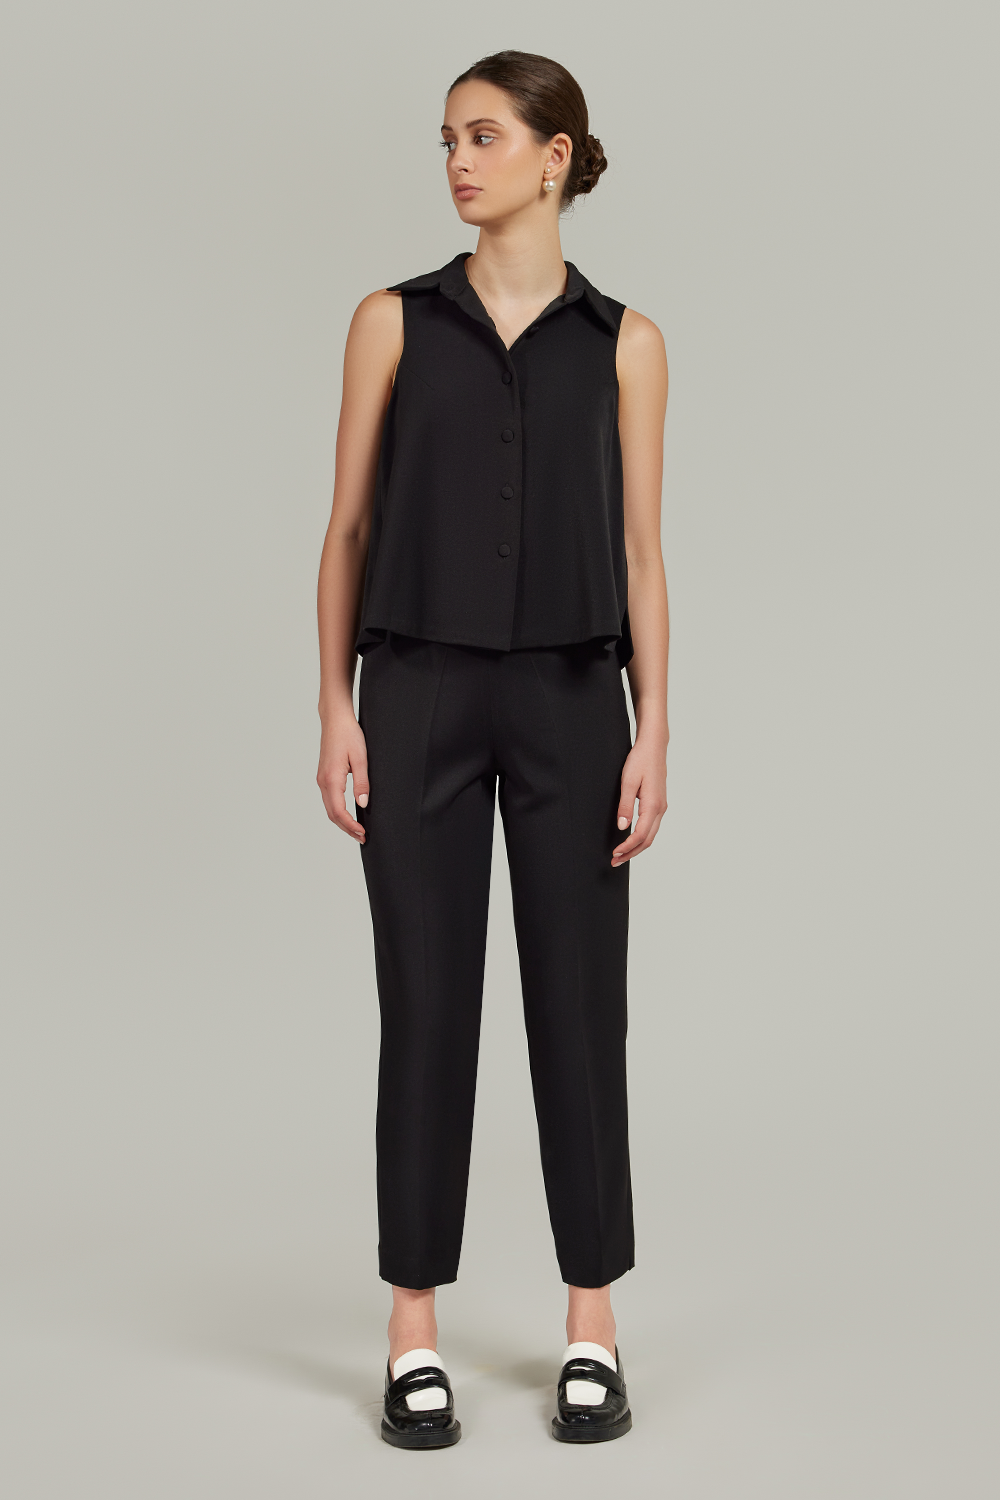 Black Stretch Suiting Sleeveless Top